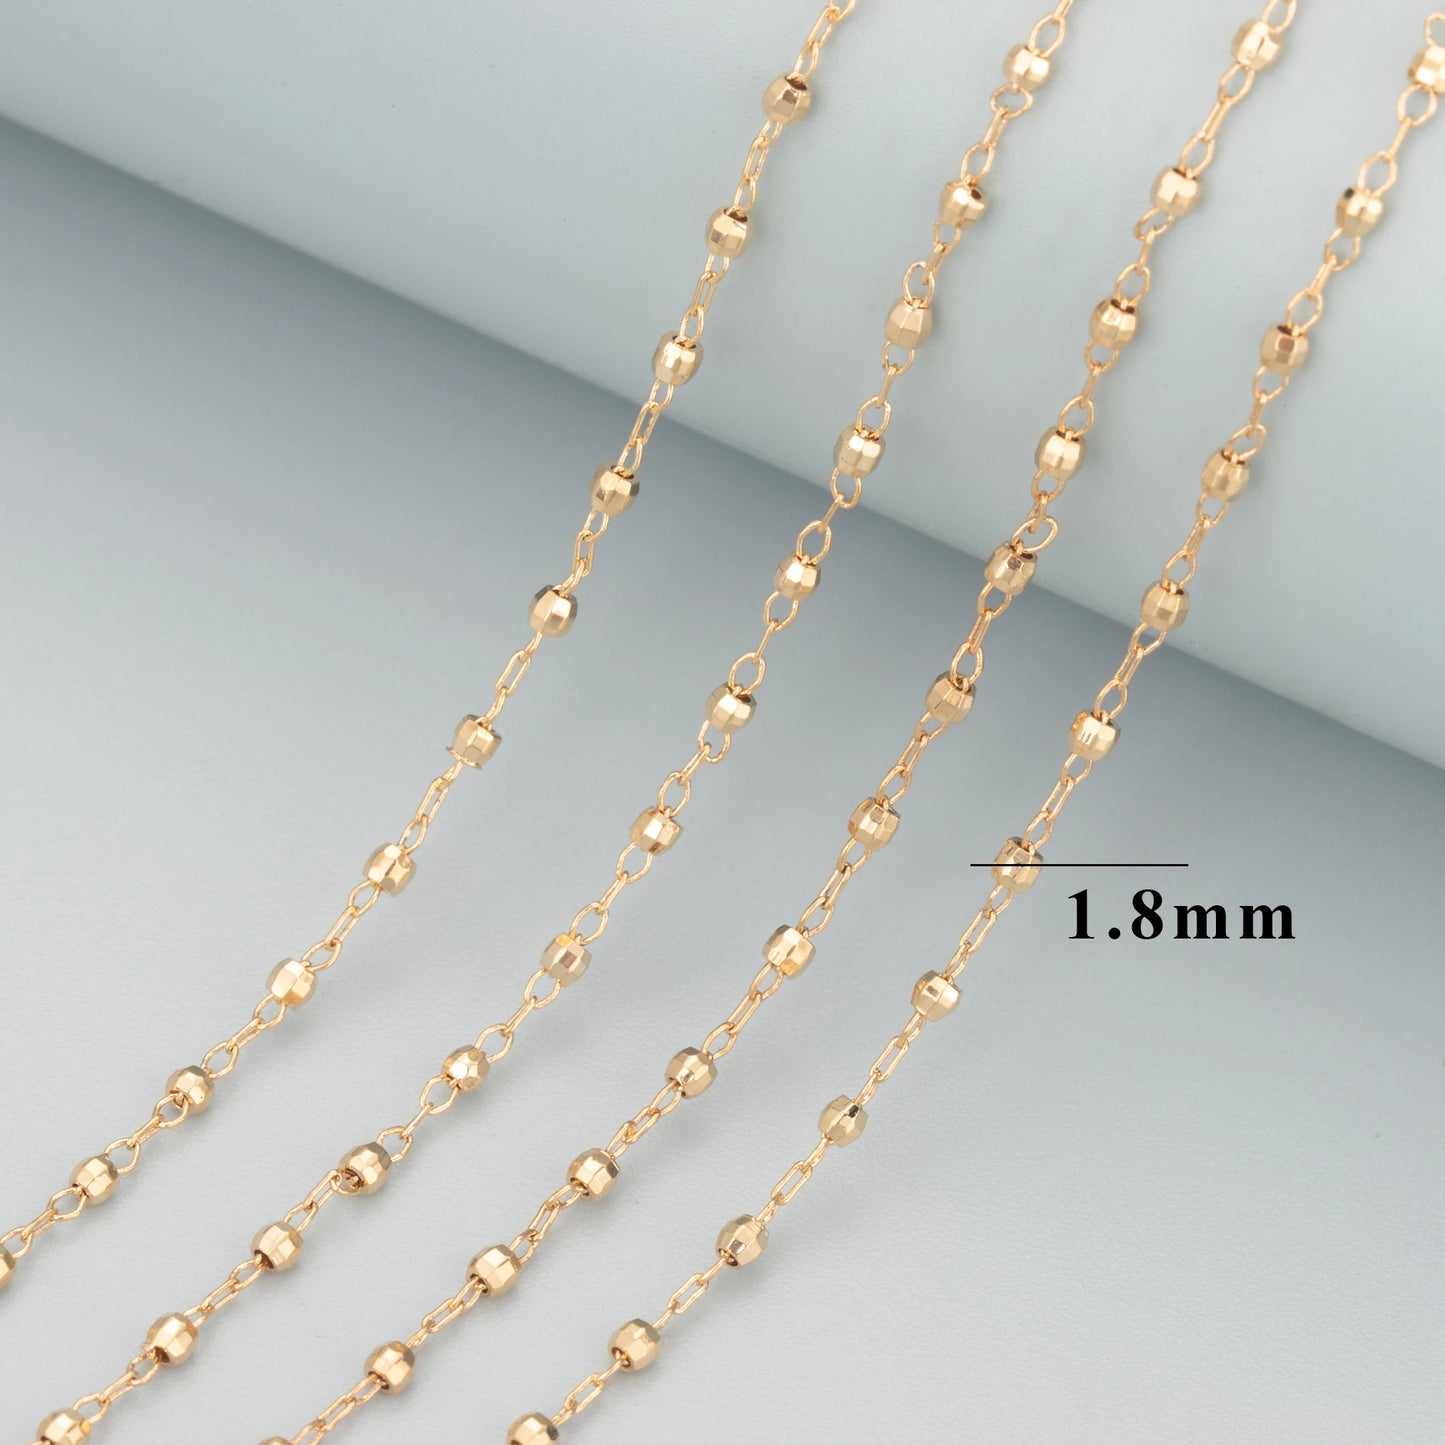 GUFEATHER C79,jewelry accessories,18k gold plated,copper,pearl,pass REACH,nickel free,diy chain necklace,jewelry making,1m/lot